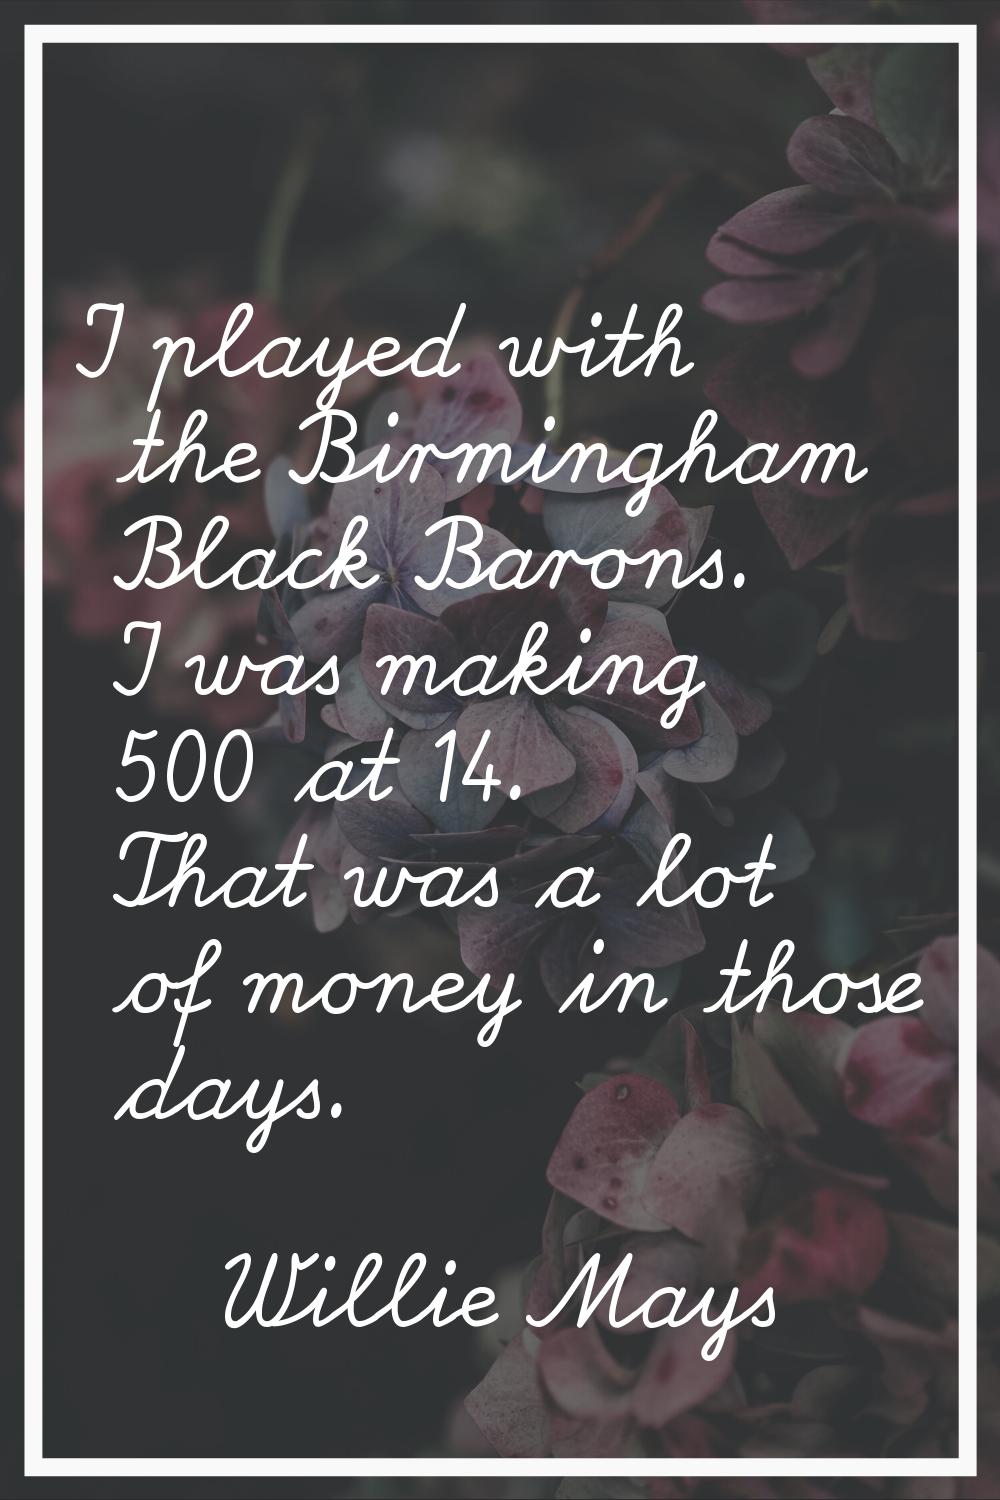 I played with the Birmingham Black Barons. I was making 500 at 14. That was a lot of money in those